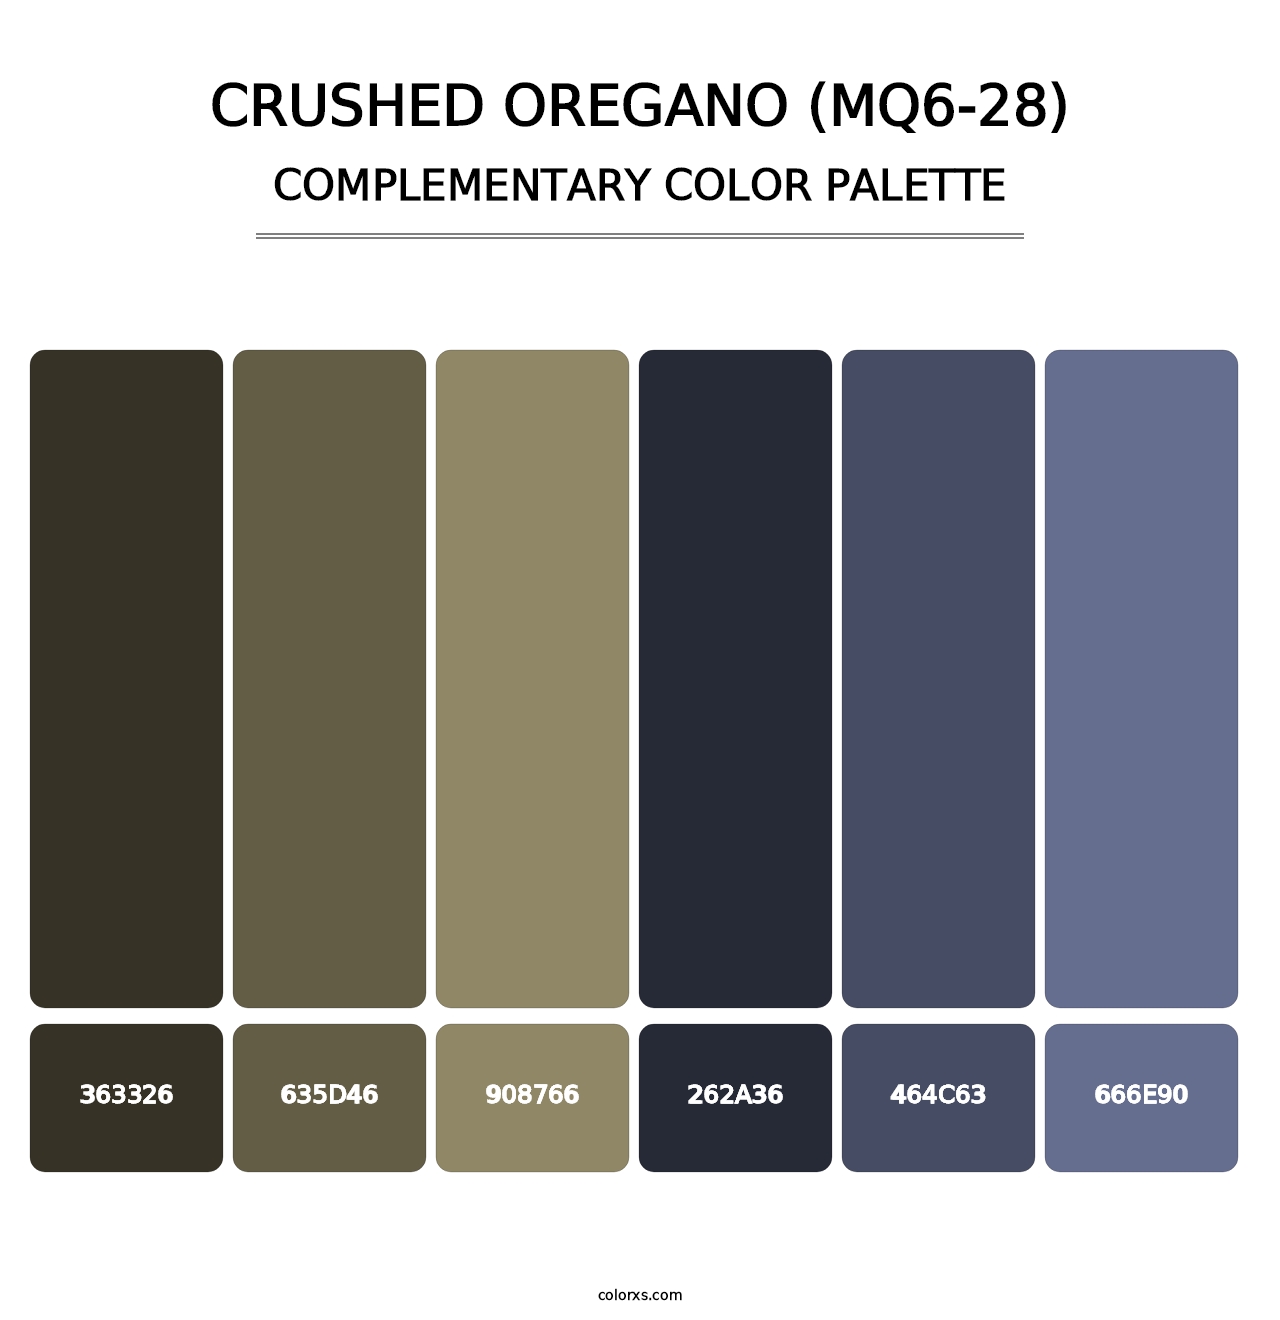 Crushed Oregano (MQ6-28) - Complementary Color Palette